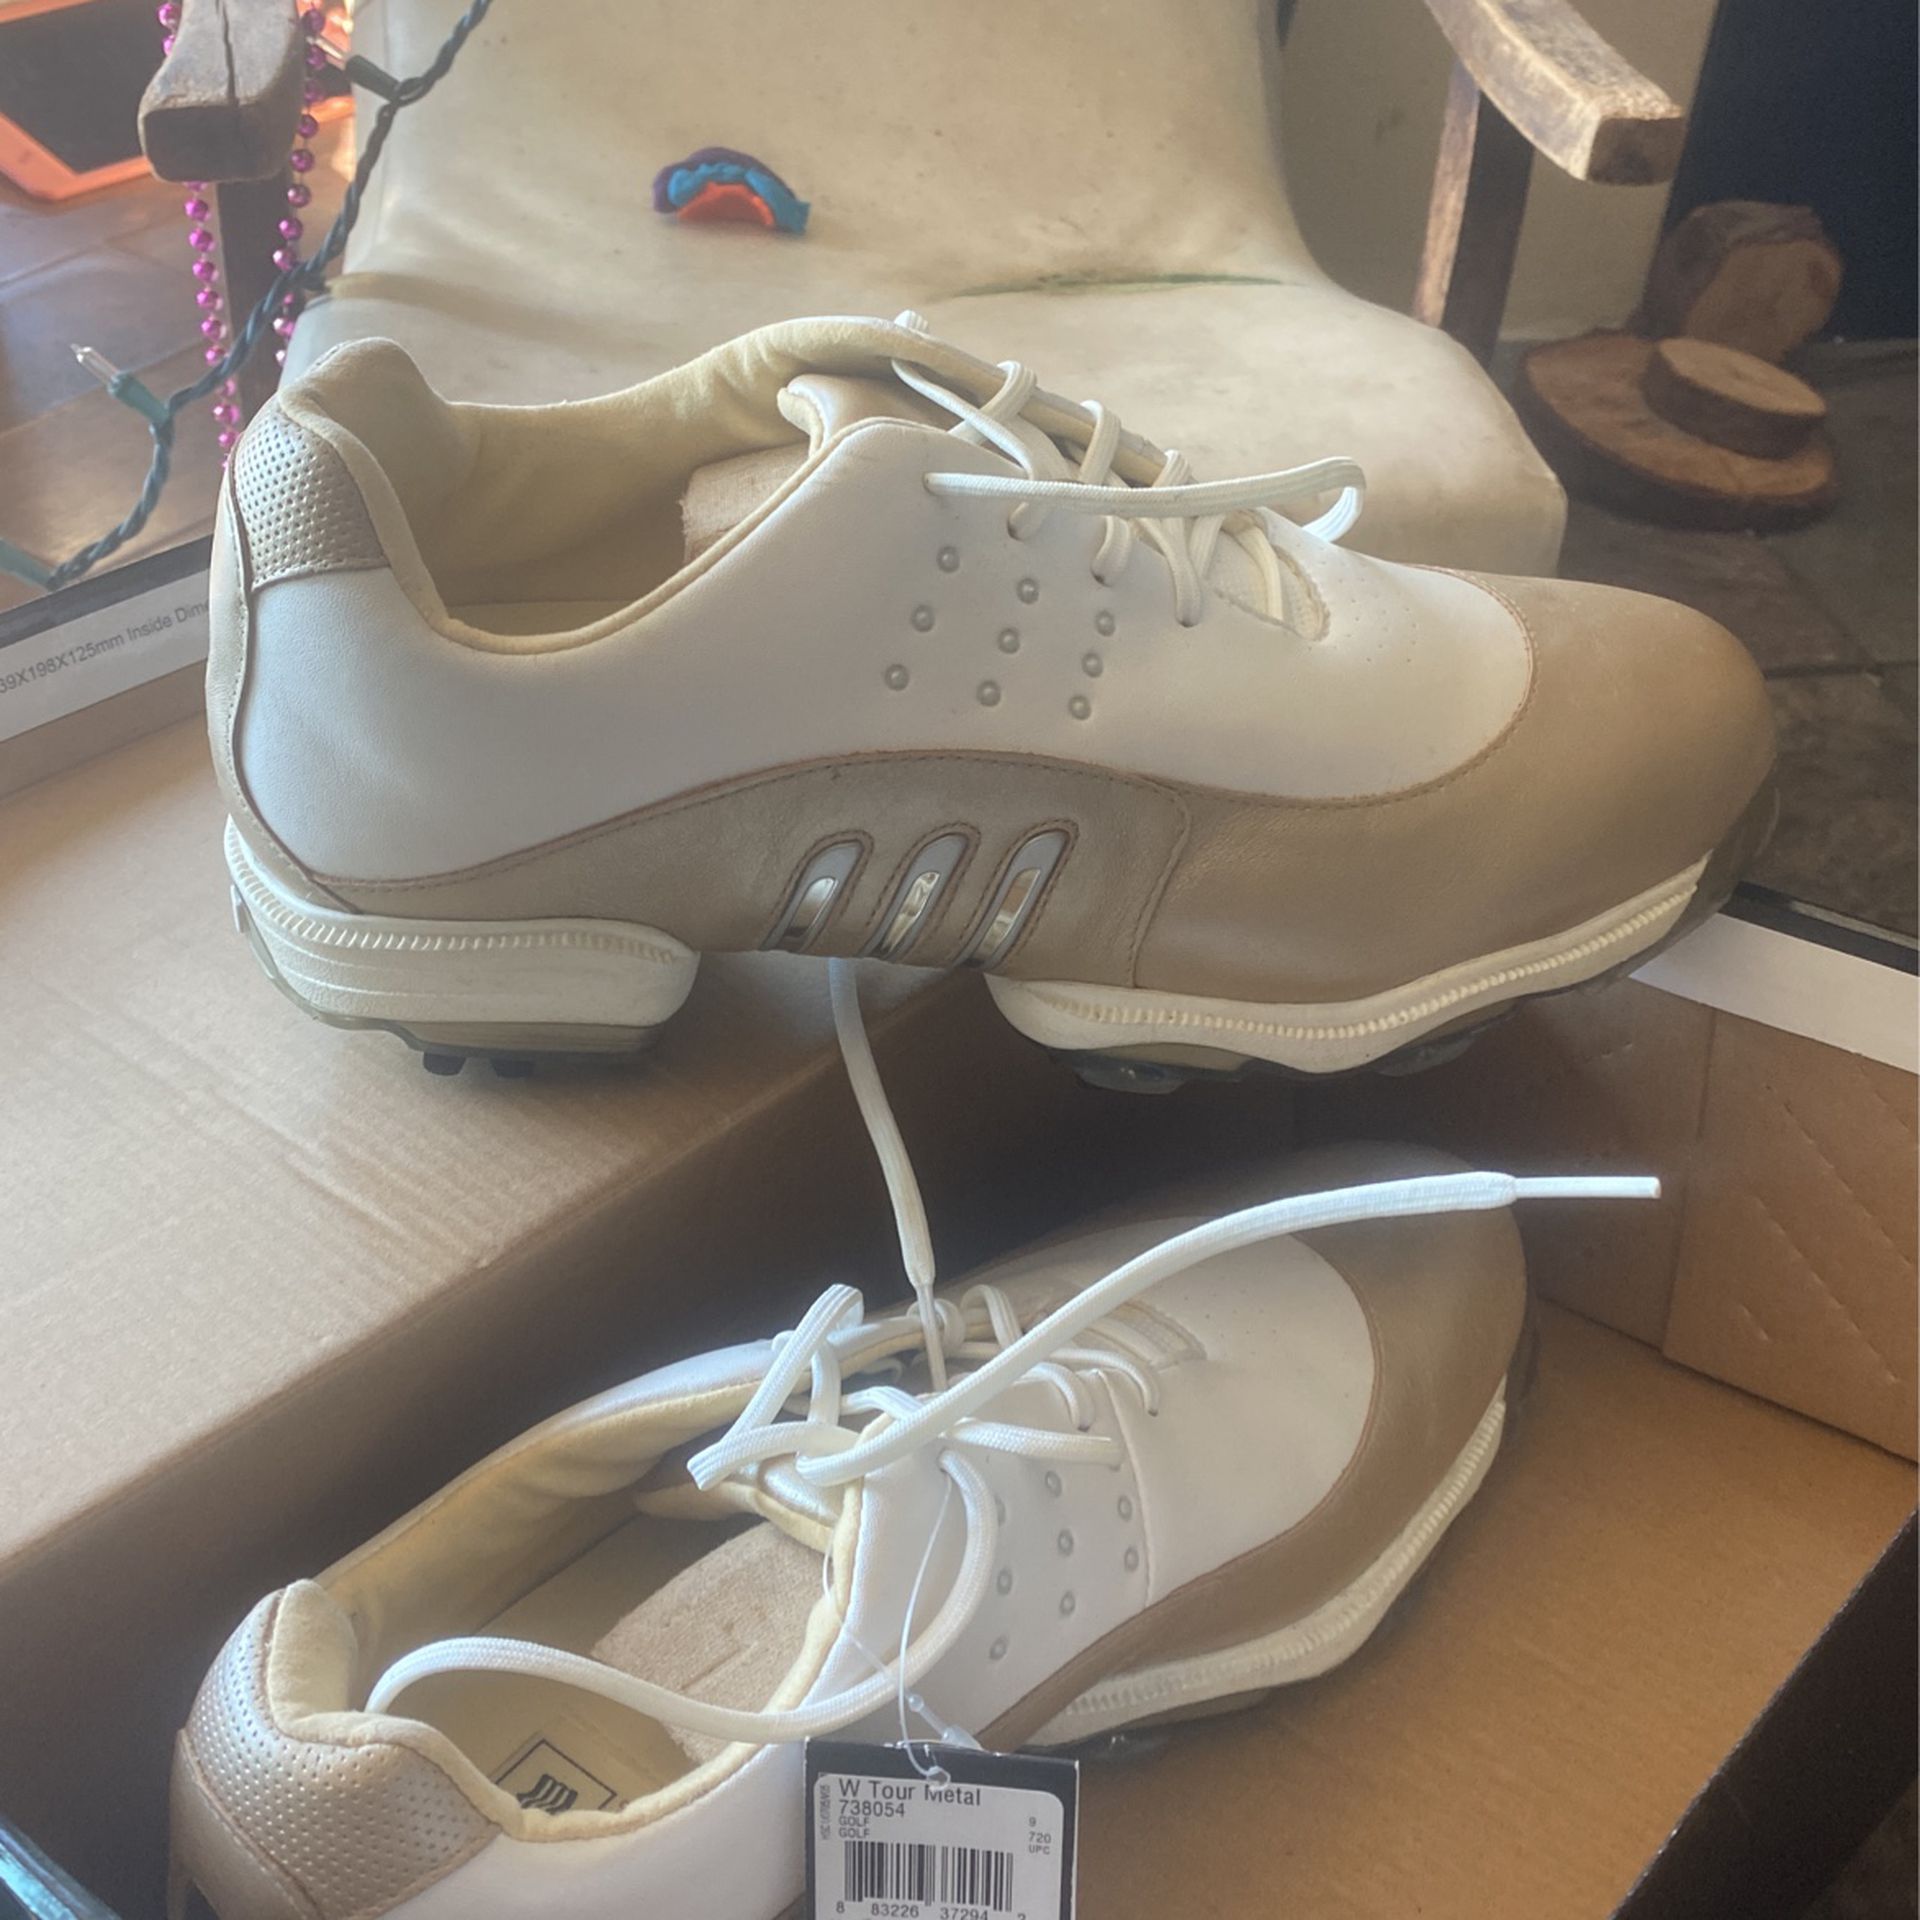 Colonos Descomponer Gruñón Adidas Gold Silver Tour Metal Golf Shoes for Sale in San Diego, CA - OfferUp